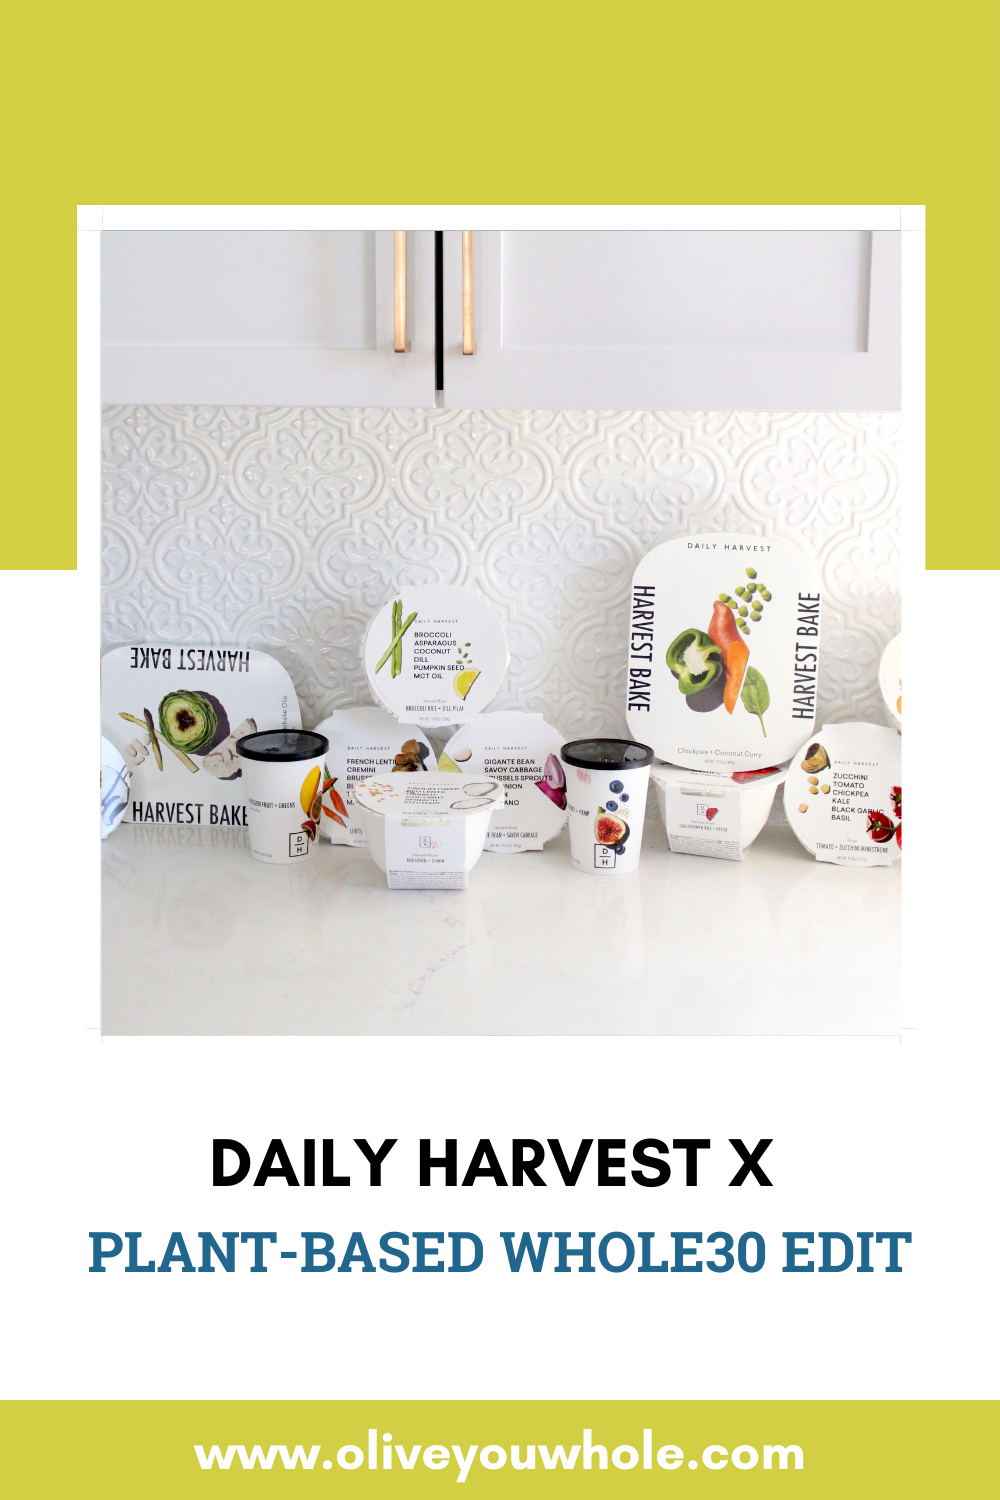 DAILY HARVEST X PLANT-BASED WHOLE30 EDIT